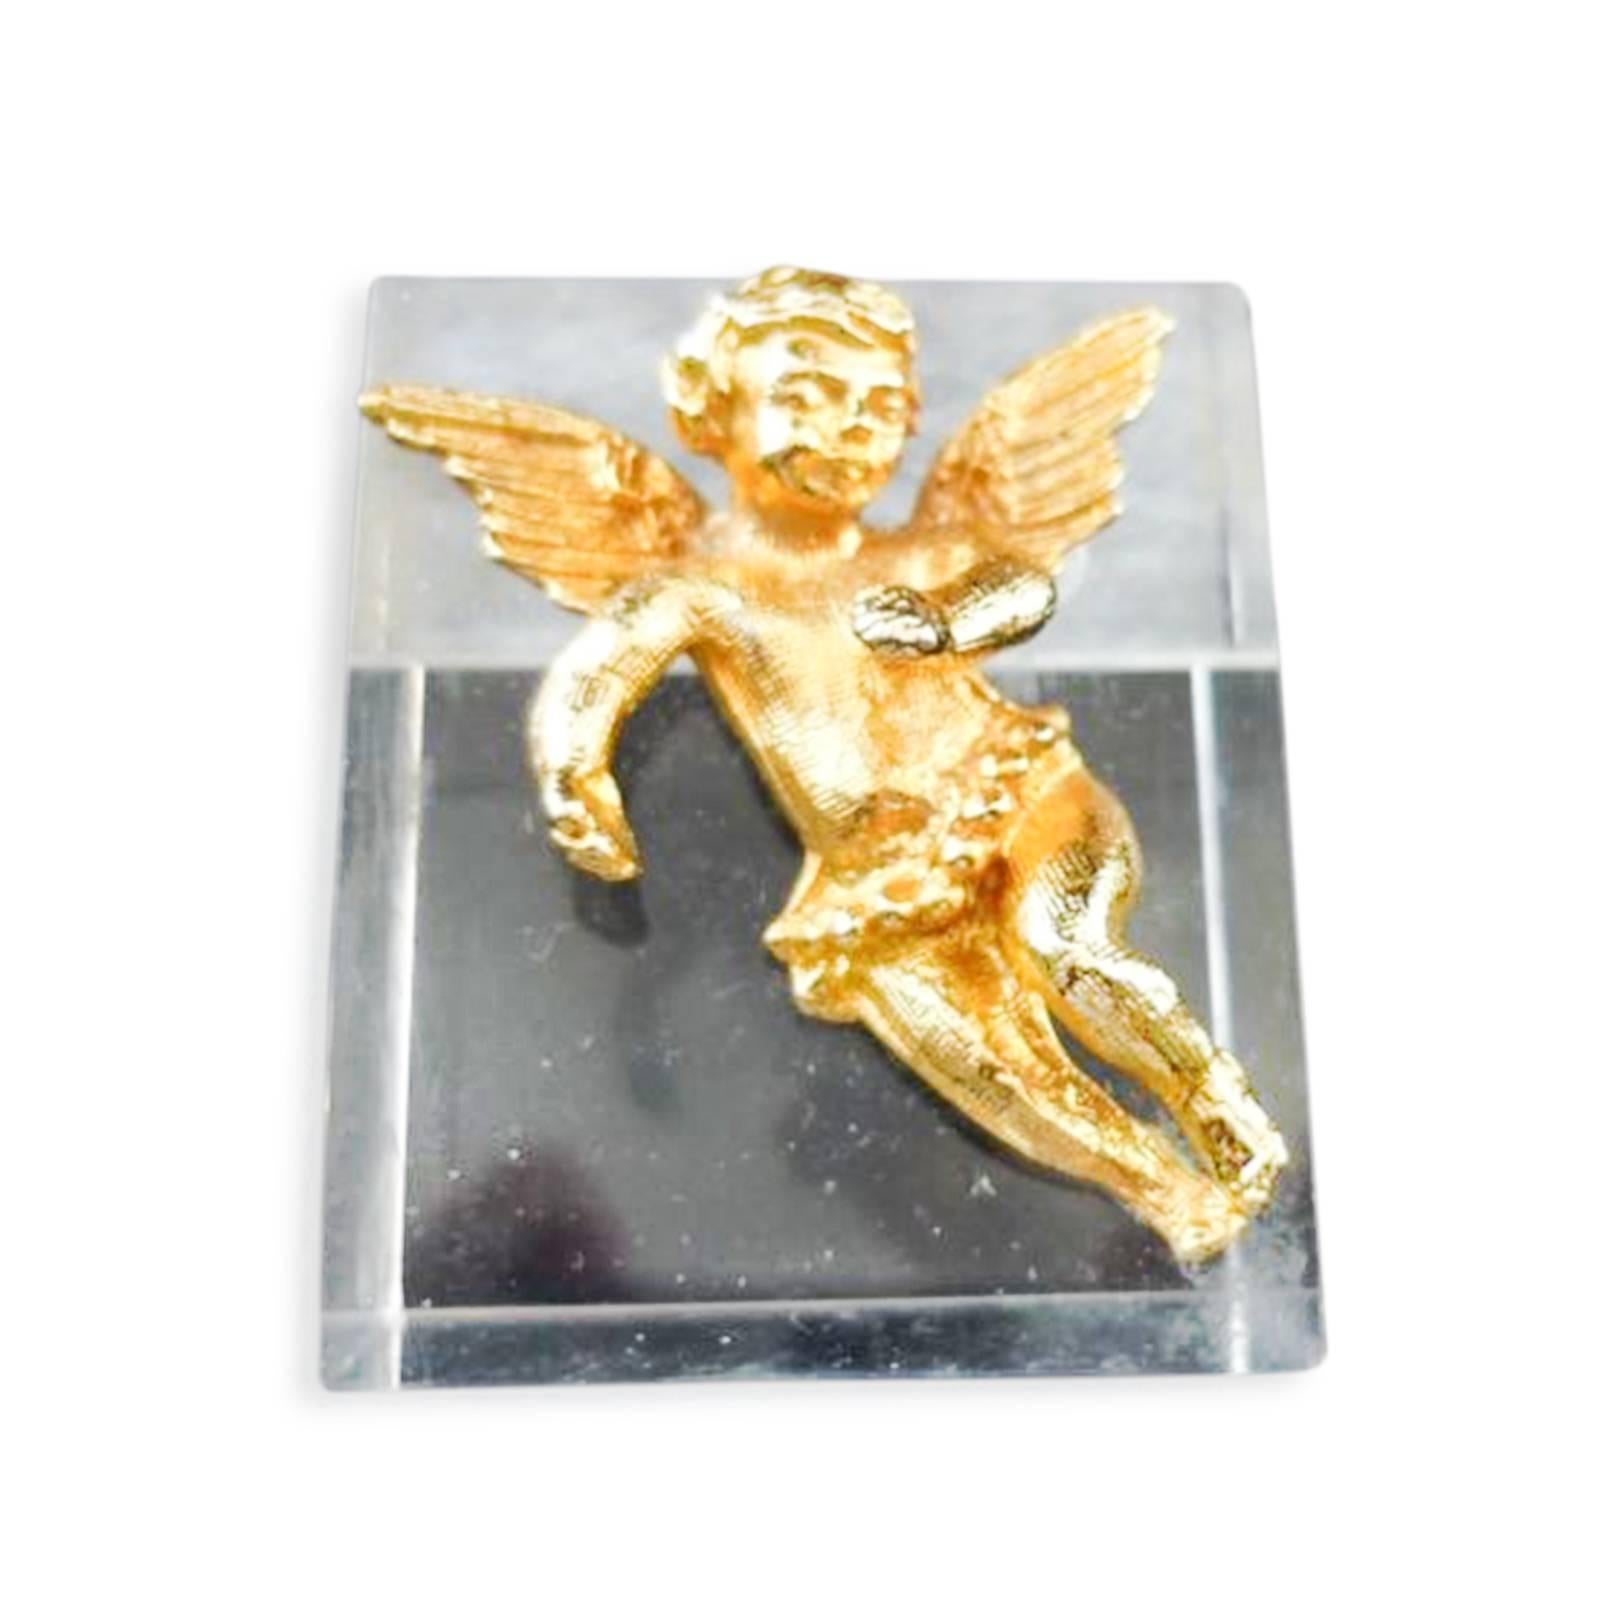 Graceful cherub place card/photo holders sold as a set of six from mid-20th century.
It's the little touches that really create a big impact and when planning an event, it's those touches that will really add to the day.
The cherubs are gilt